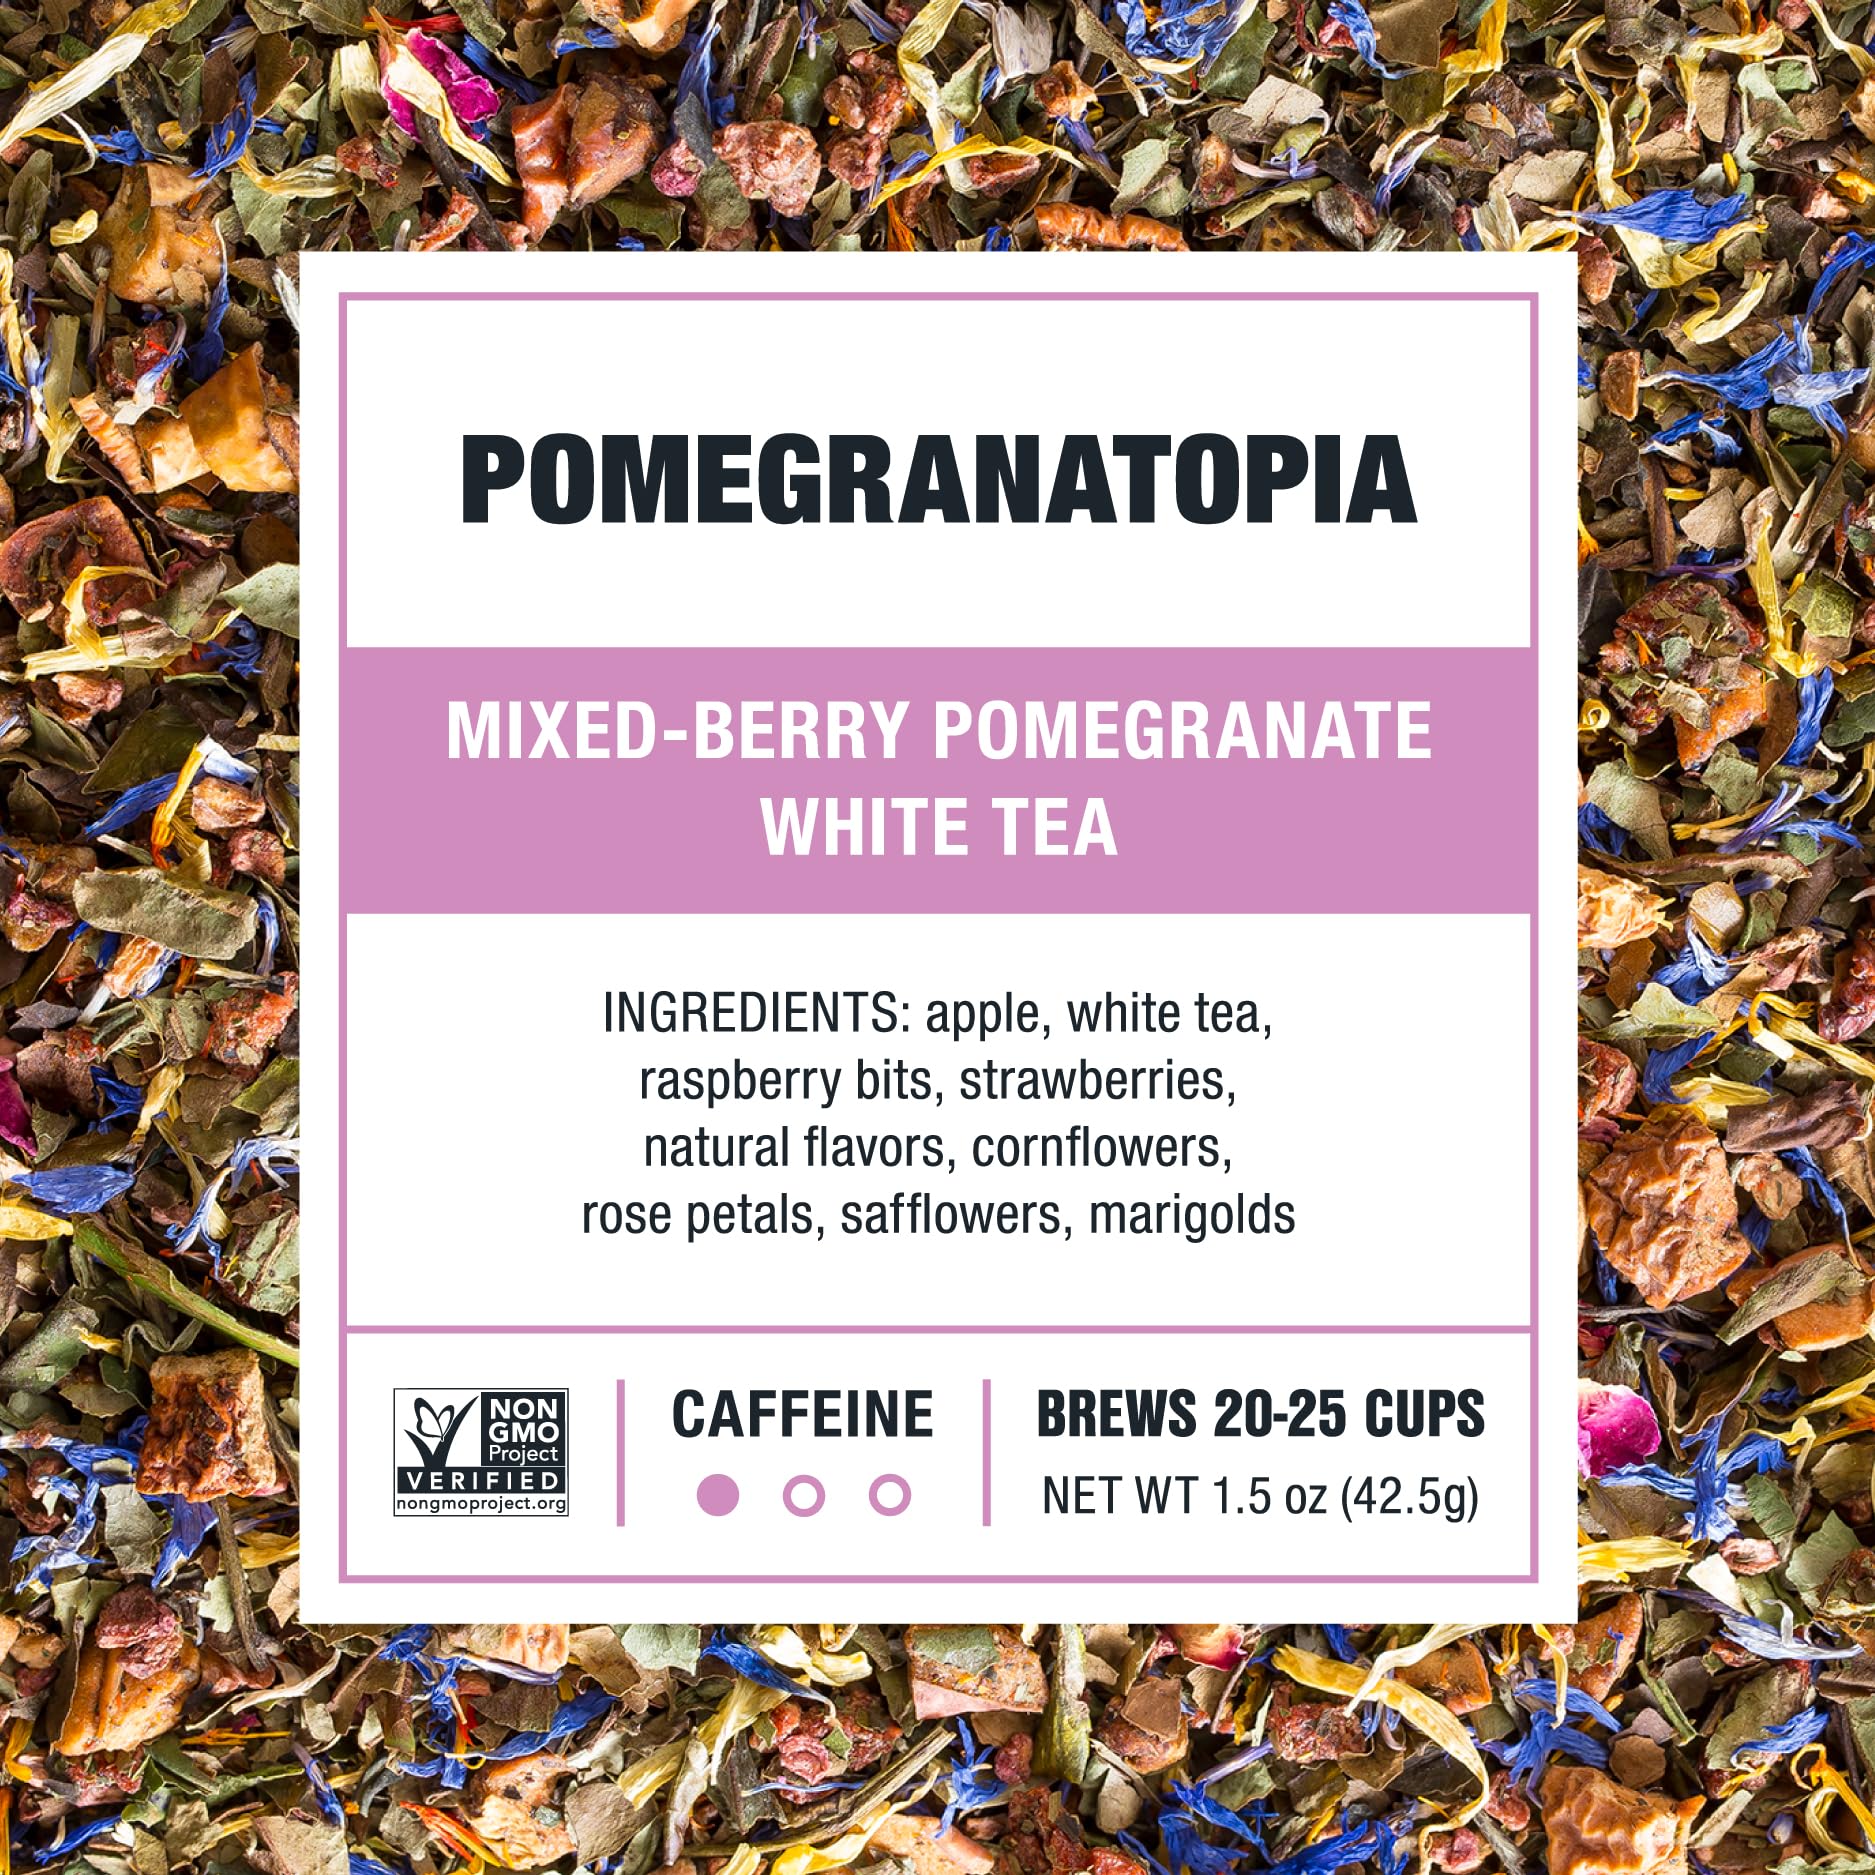 Tiesta Tea - Pomegranatopia | Mixed-Berry Pomegranate White Tea | Premuim Loose Leaf Tea Blend | Low Caffeinated Tea | Make Hot or Iced Tea & Brews Up to 25 Cups - 1.5 Ounce Resealable Pouch